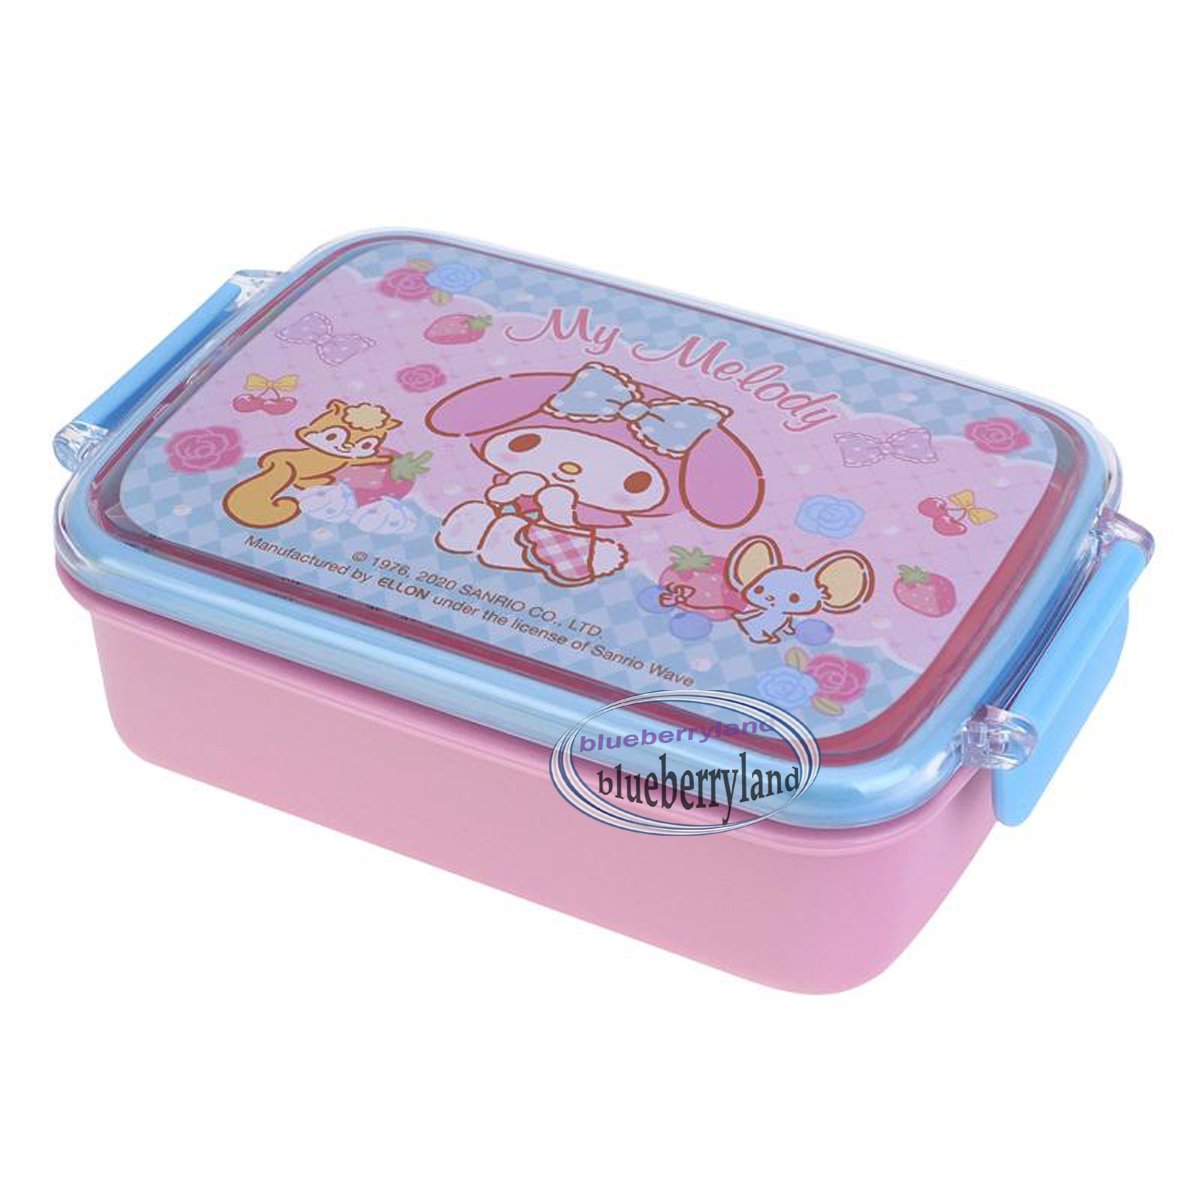 Sanrio My Melody Bento LunchBox Lunch box Food Container kids girls ladies P20